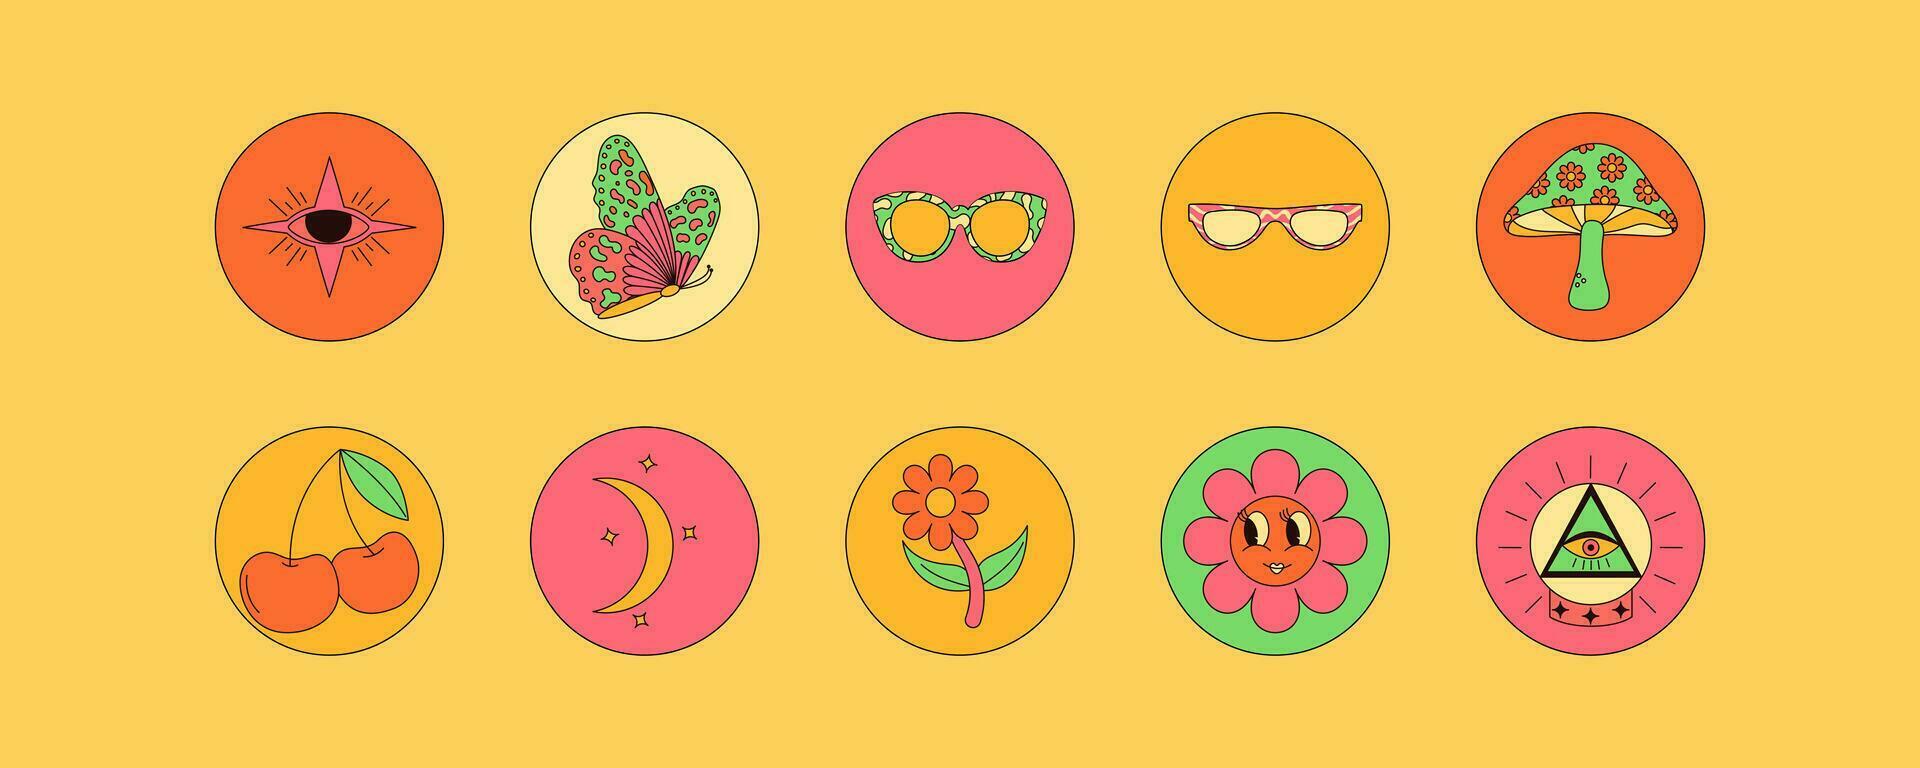 Collection of vintage groovy elements. Mushrooms, flower, cherry, eyes, sunglasses and more. Retro vector art